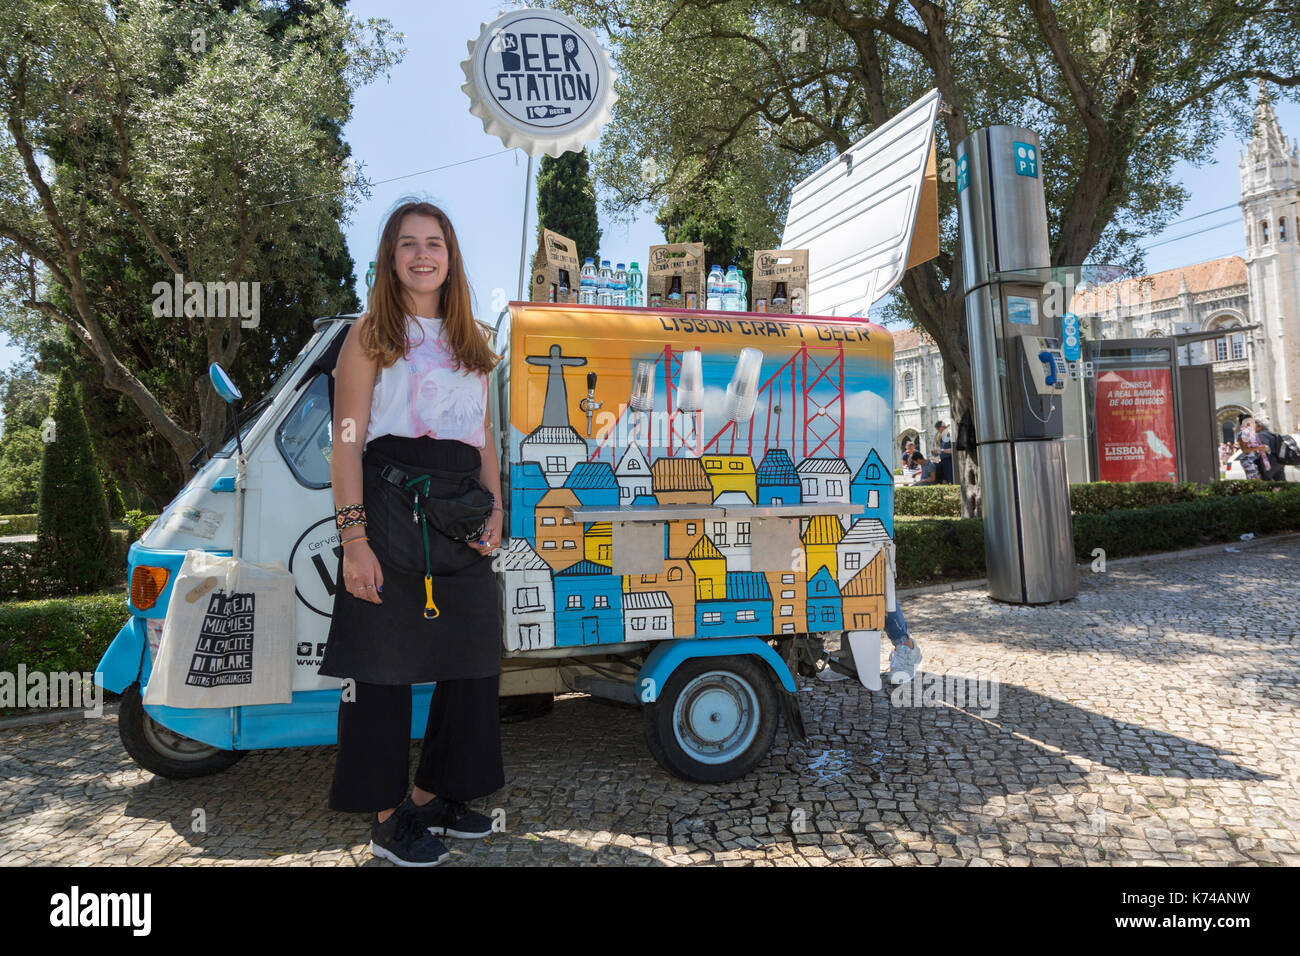 Young woman smiling at the camera standing beside a tuk-tuk beer station Lisbon Portugal Stock Photo